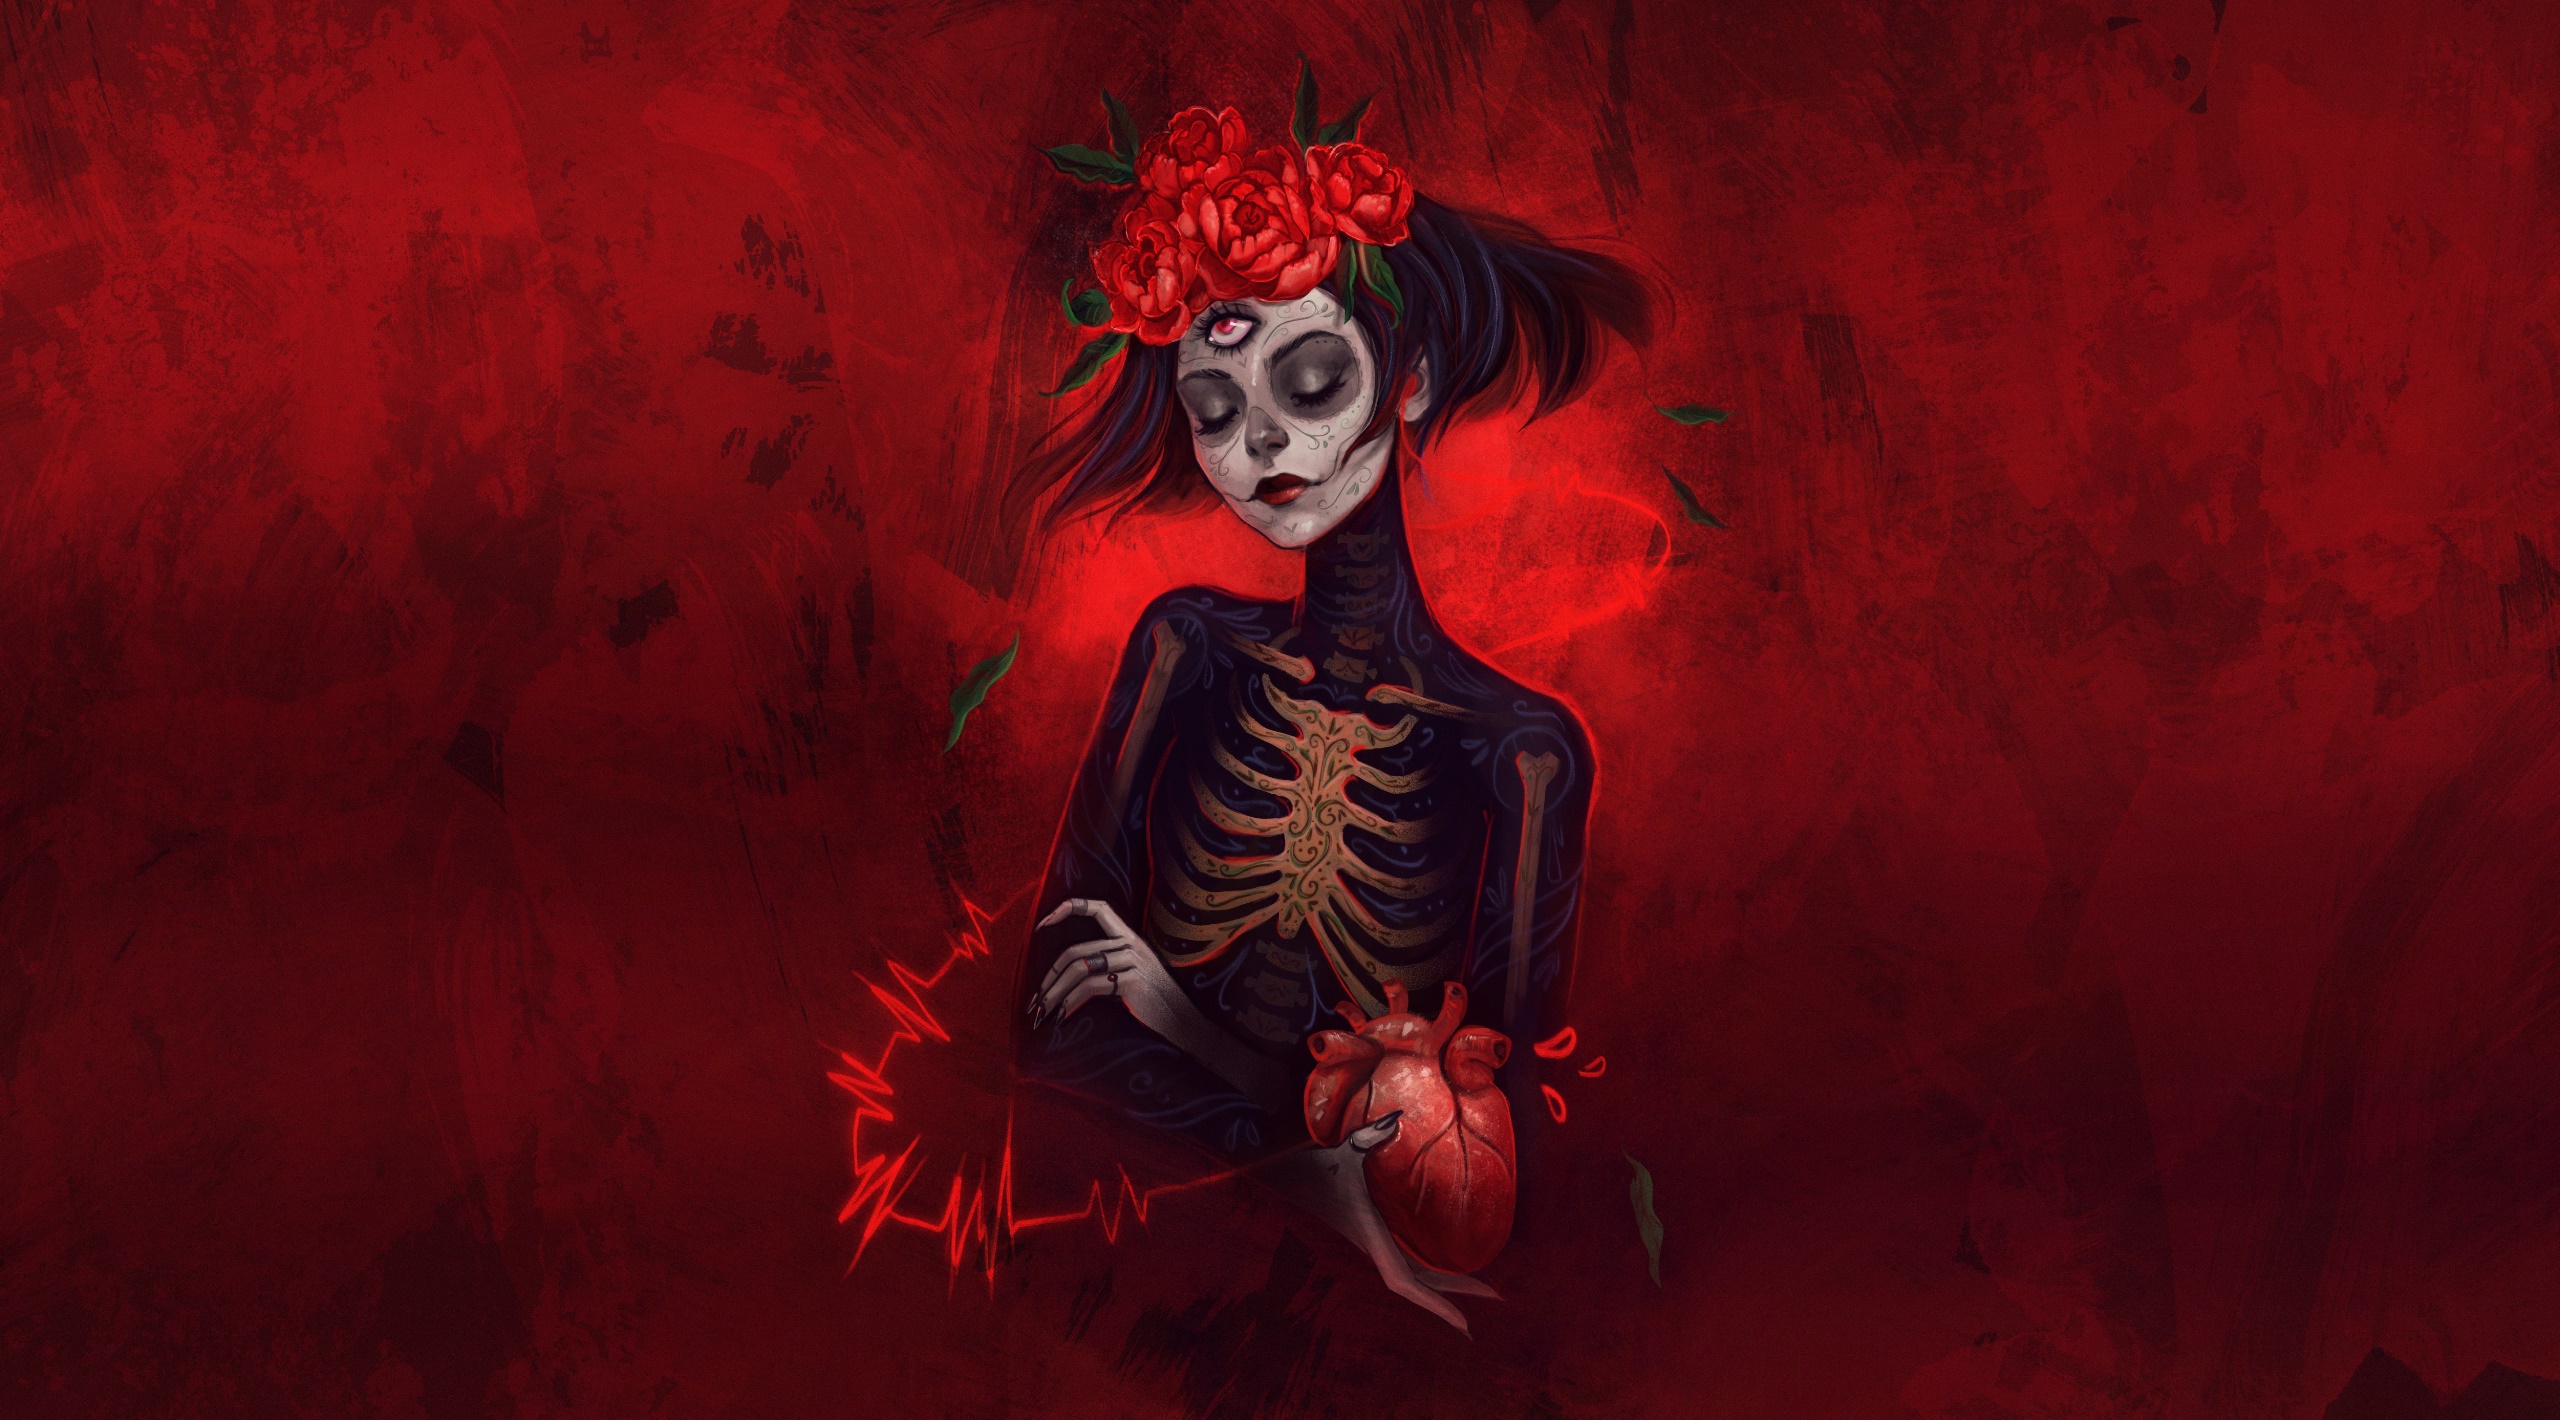 General 2560x1420 artwork women red background skull red simple background fantasy girl digital art minimalism short hair flower in hair closed eyes closed mouth skeleton body paint heart organs Dia de los Muertos red lipstick lipstick black nails painted nails